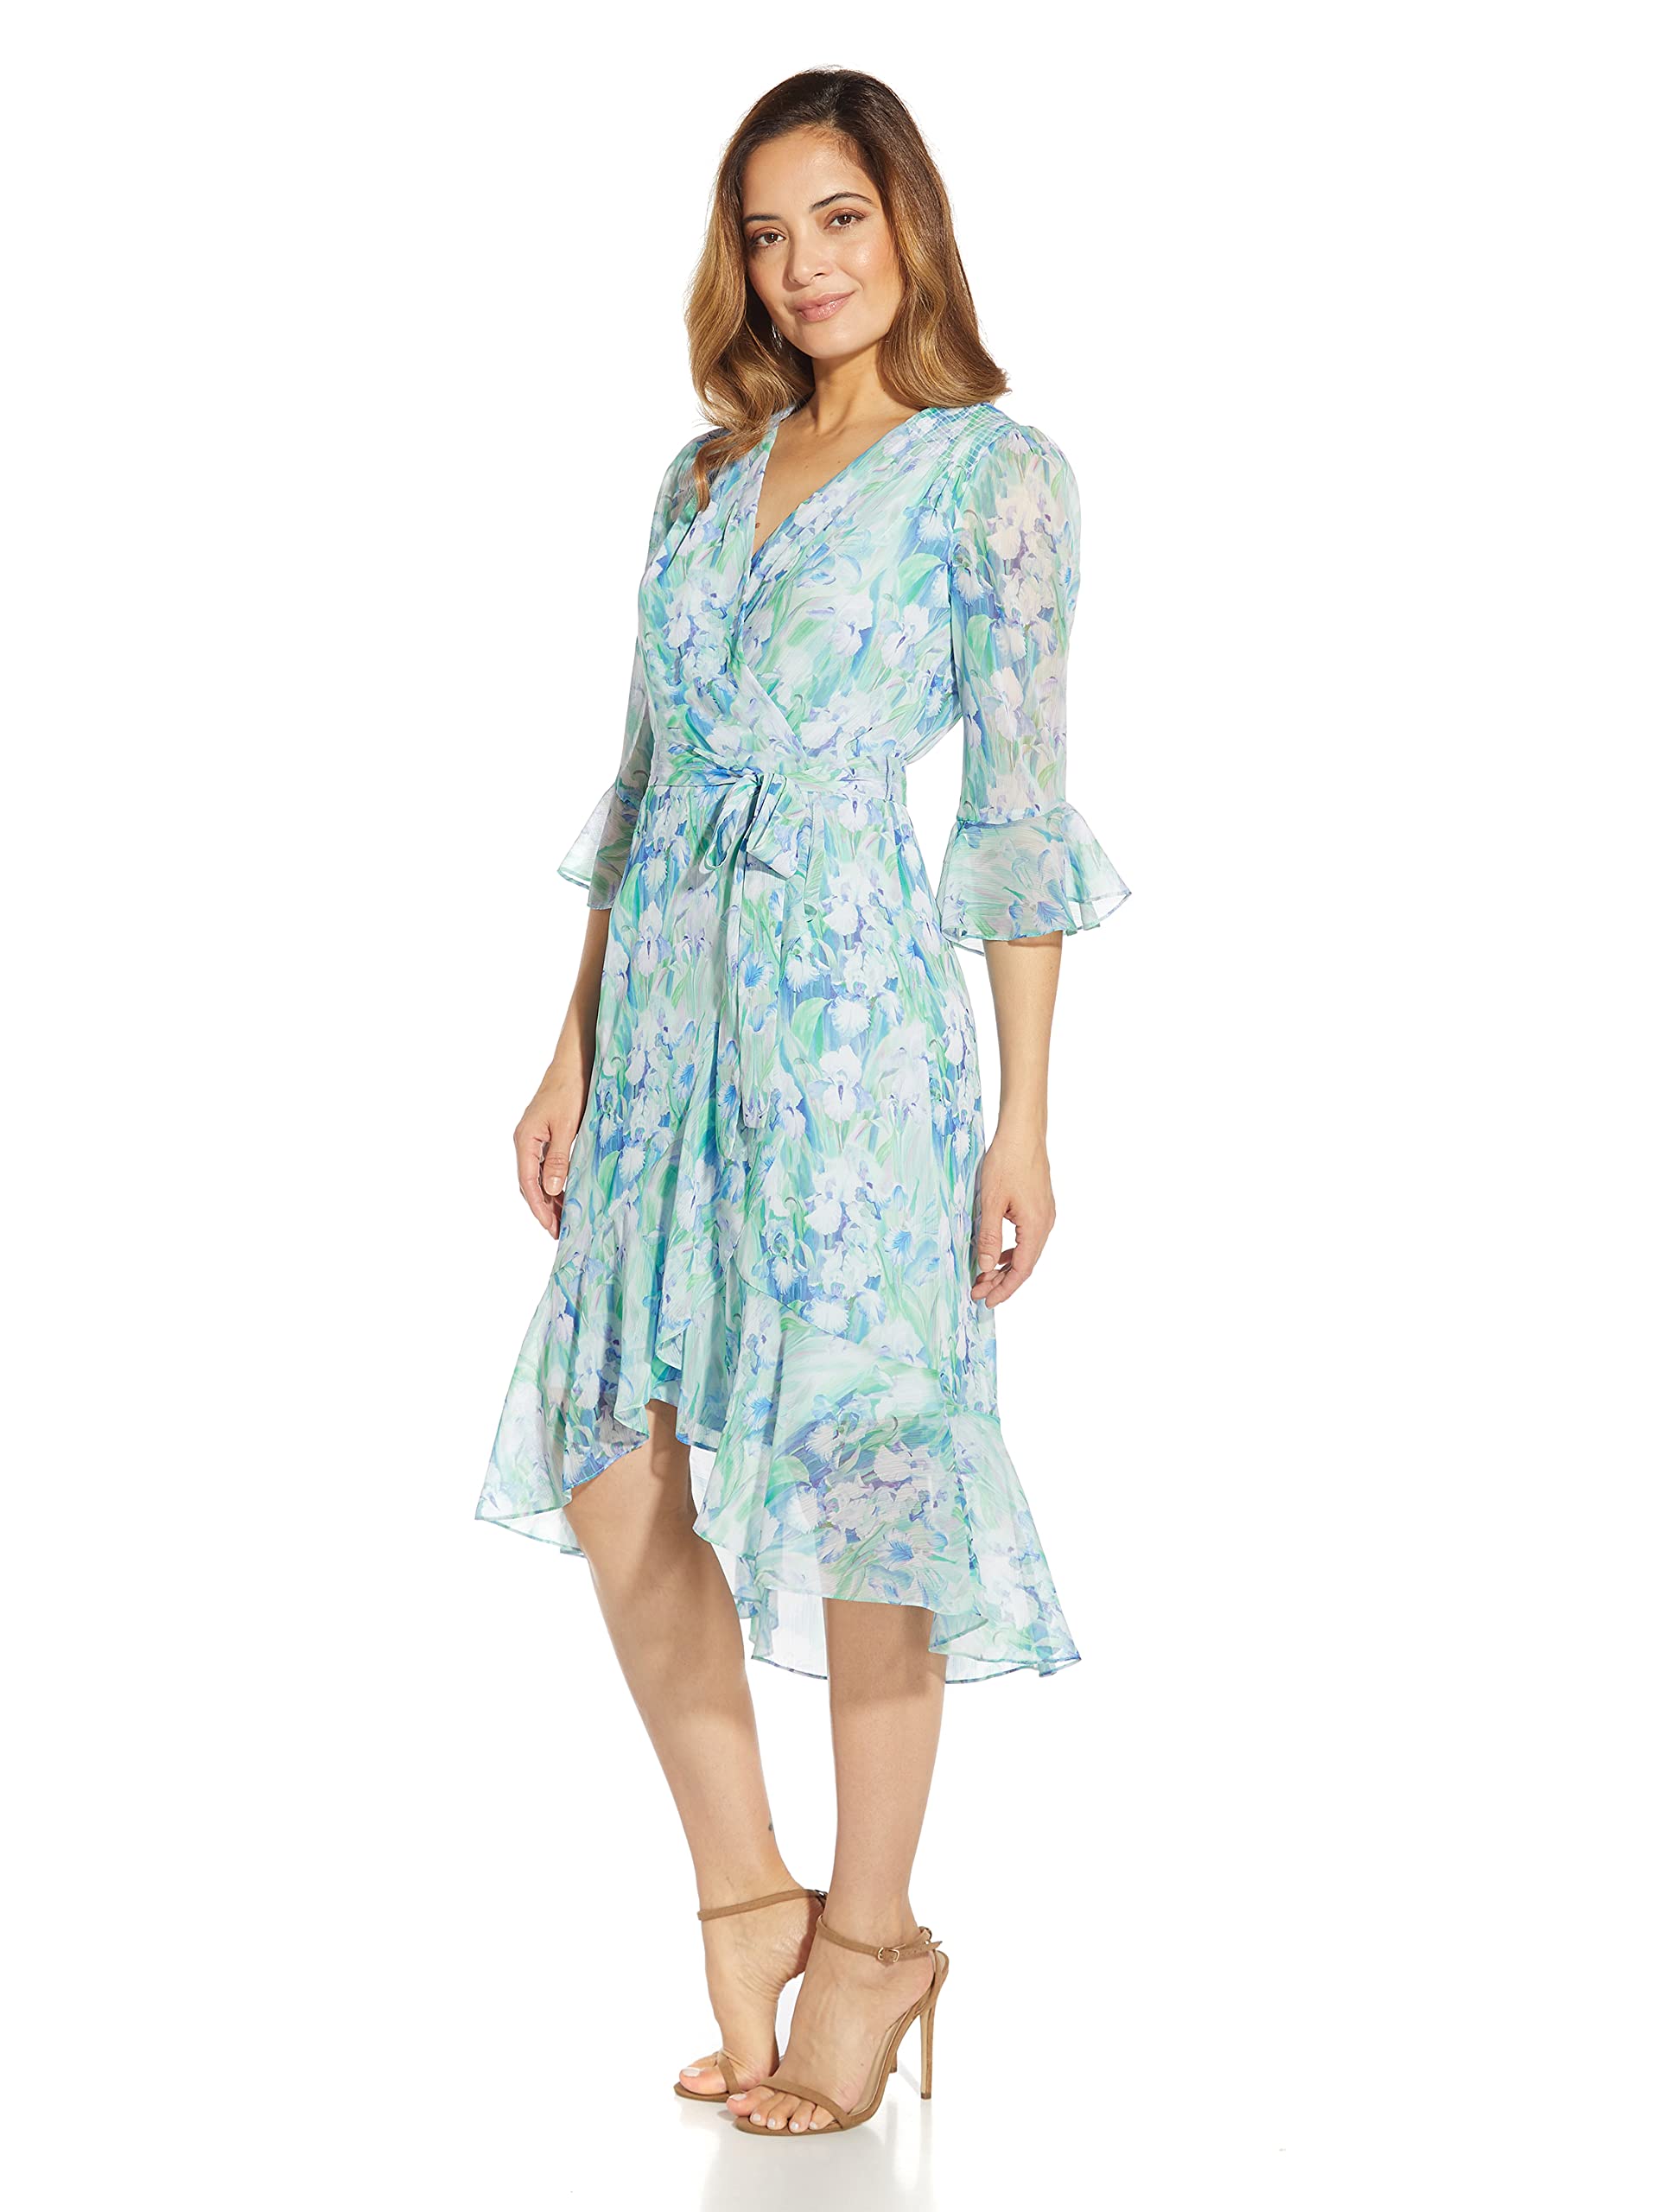 Adrianna Papell Women's Printed Chiffon Short Dress with Three Quarter Bell Sleeves